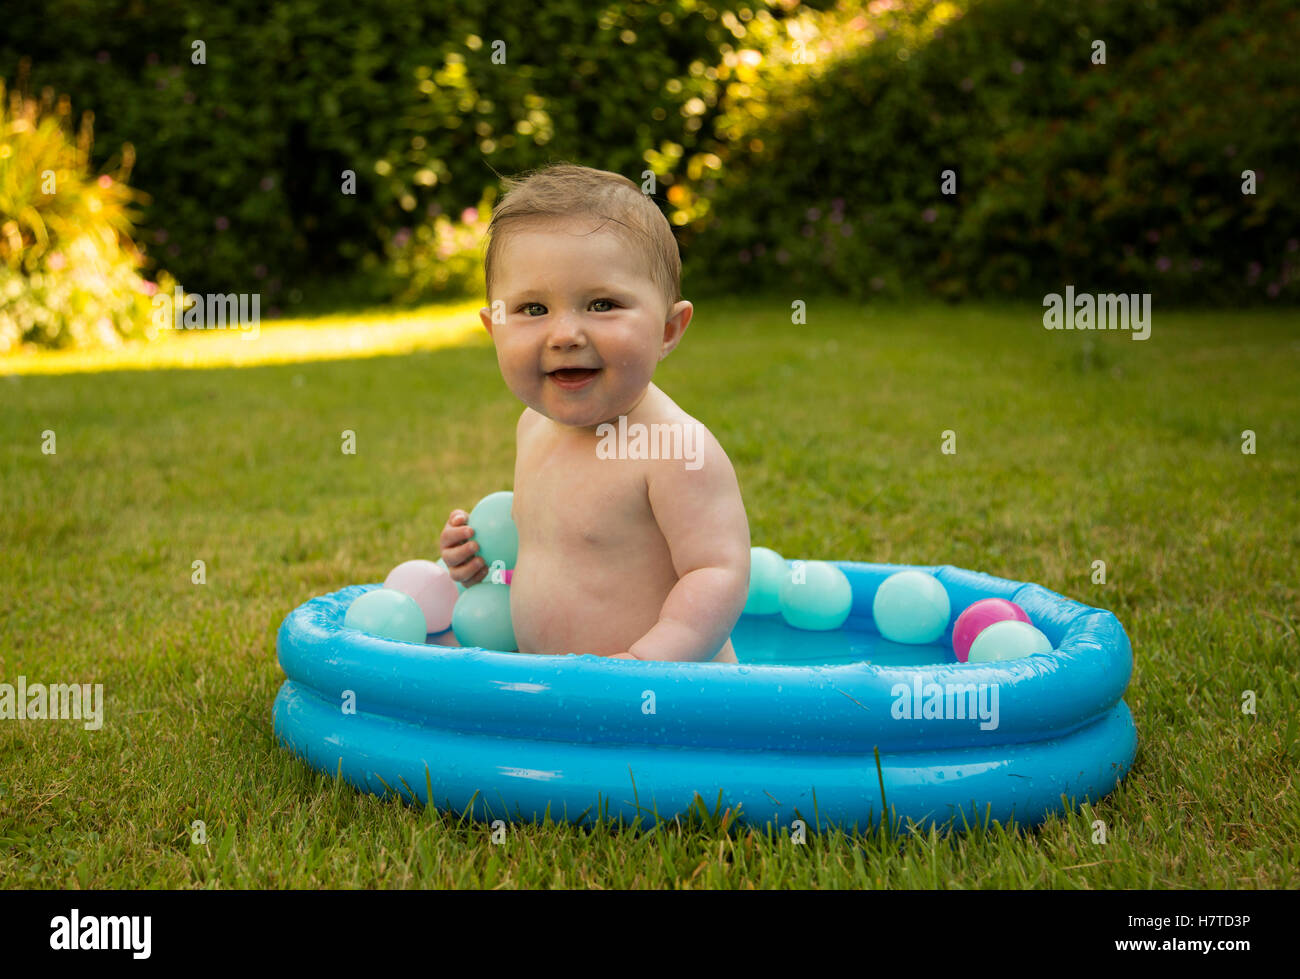 baby girl in a paddling pool in a garden during summer Stock Photo